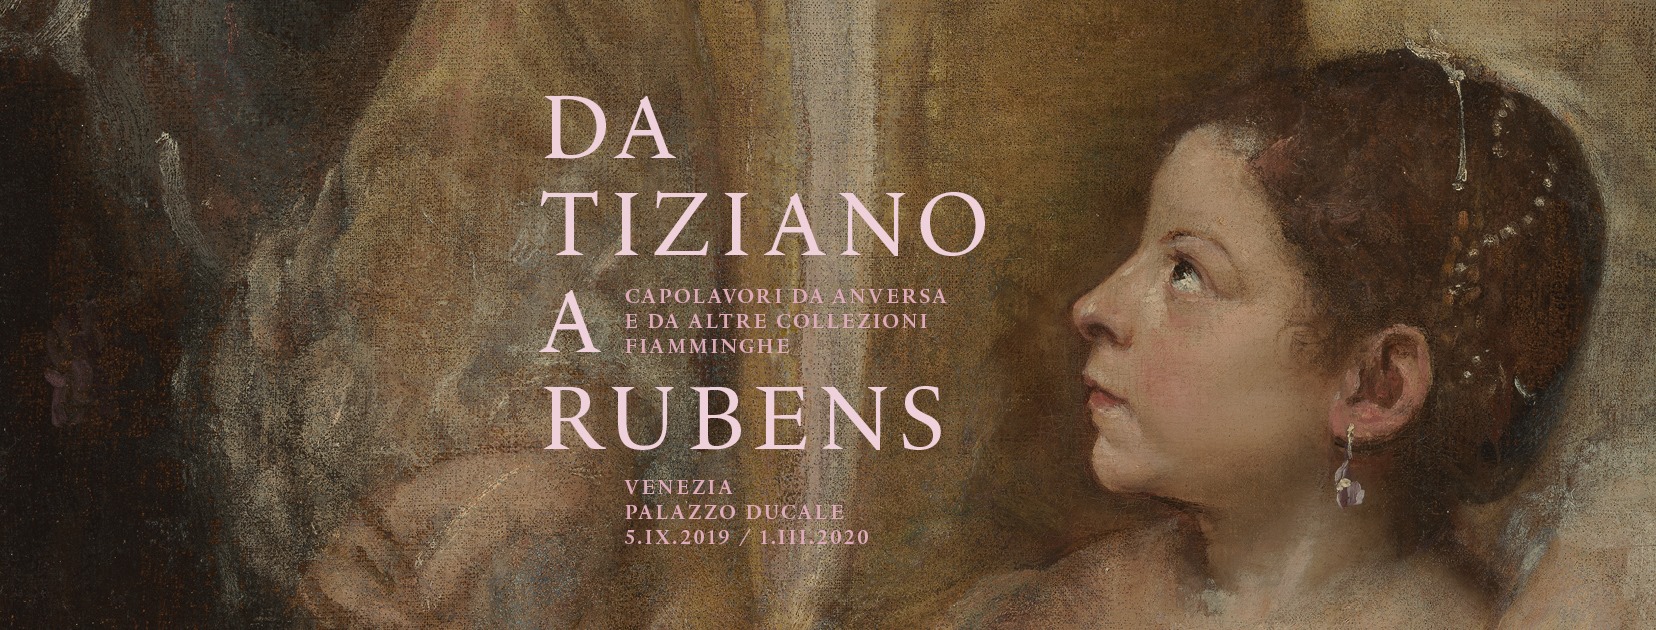 From Titian to Rubens: masterpieces from Antwerp and other Flemish collections